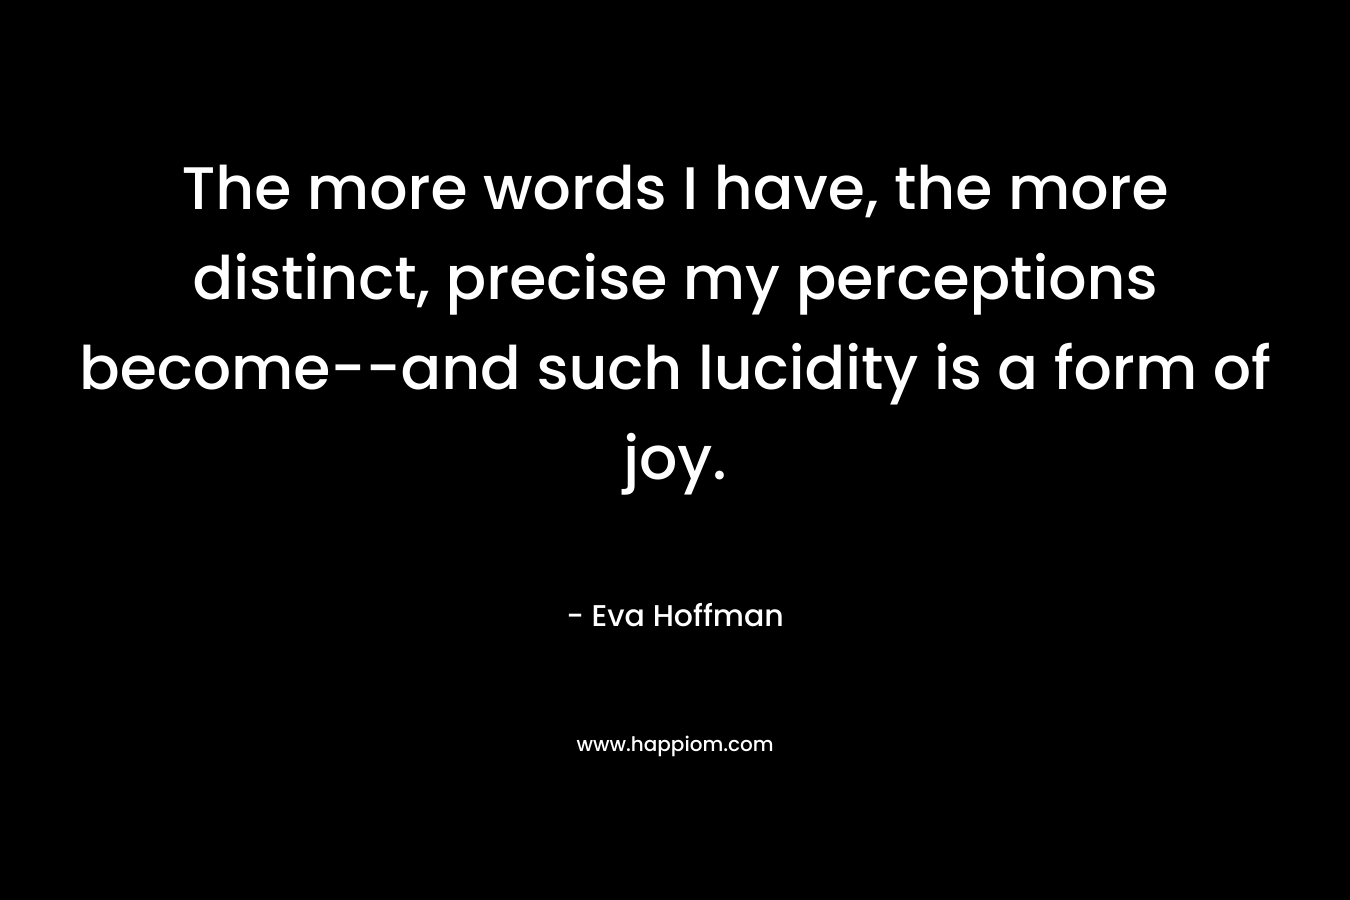 The more words I have, the more distinct, precise my perceptions become–and such lucidity is a form of joy. – Eva Hoffman